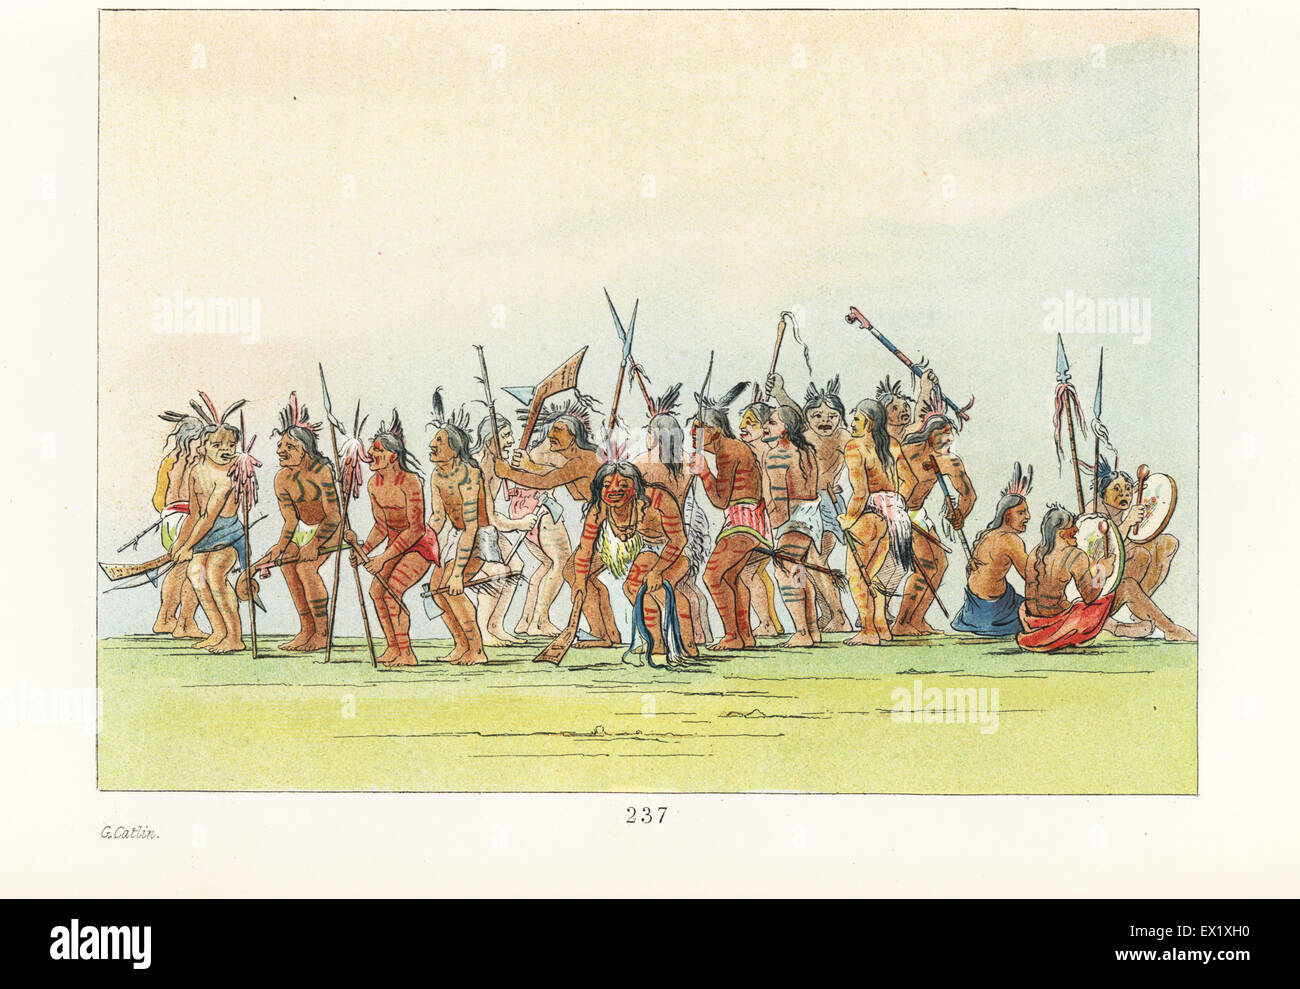 Sioux or Dakota braves dancing the Dog Dance, taking bites of raw dog's livers suspended on poles (left). Handcoloured lithograph from George Catlin's Manners, Customs and Condition of the North American Indians, London, 1841. Stock Photo